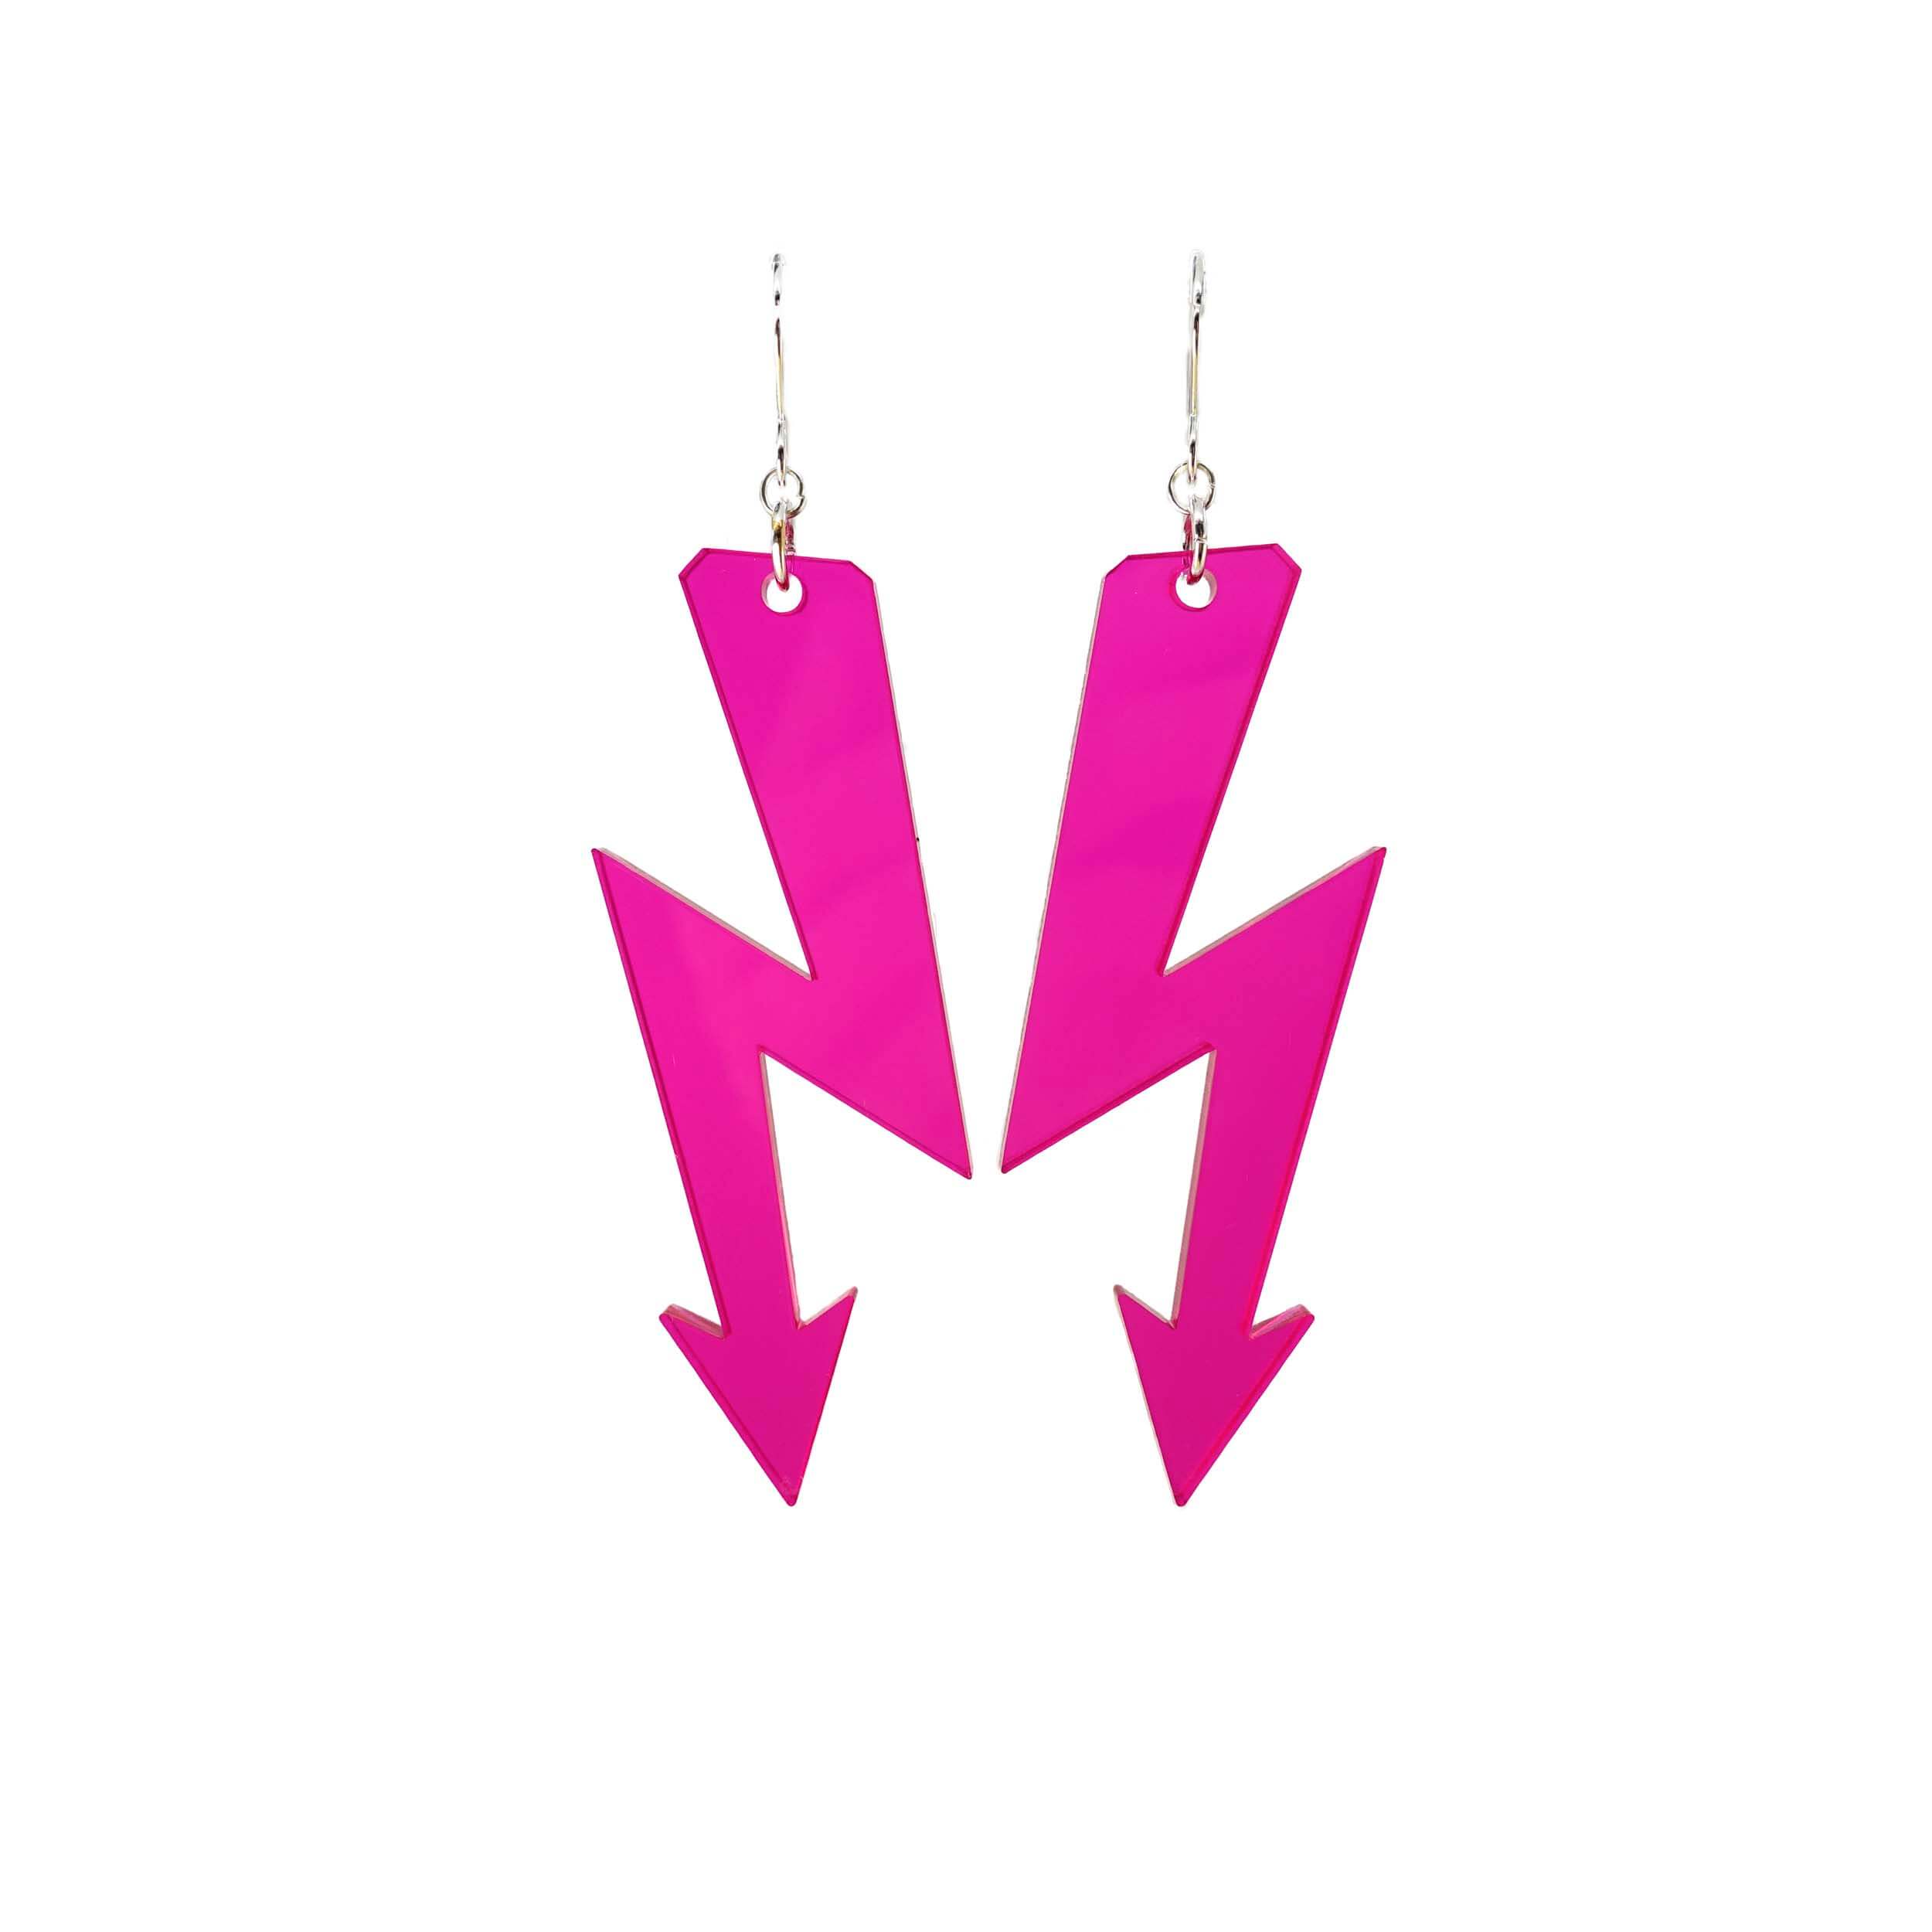 Neon pink High Voltage earrings shown hanging against a white background. 